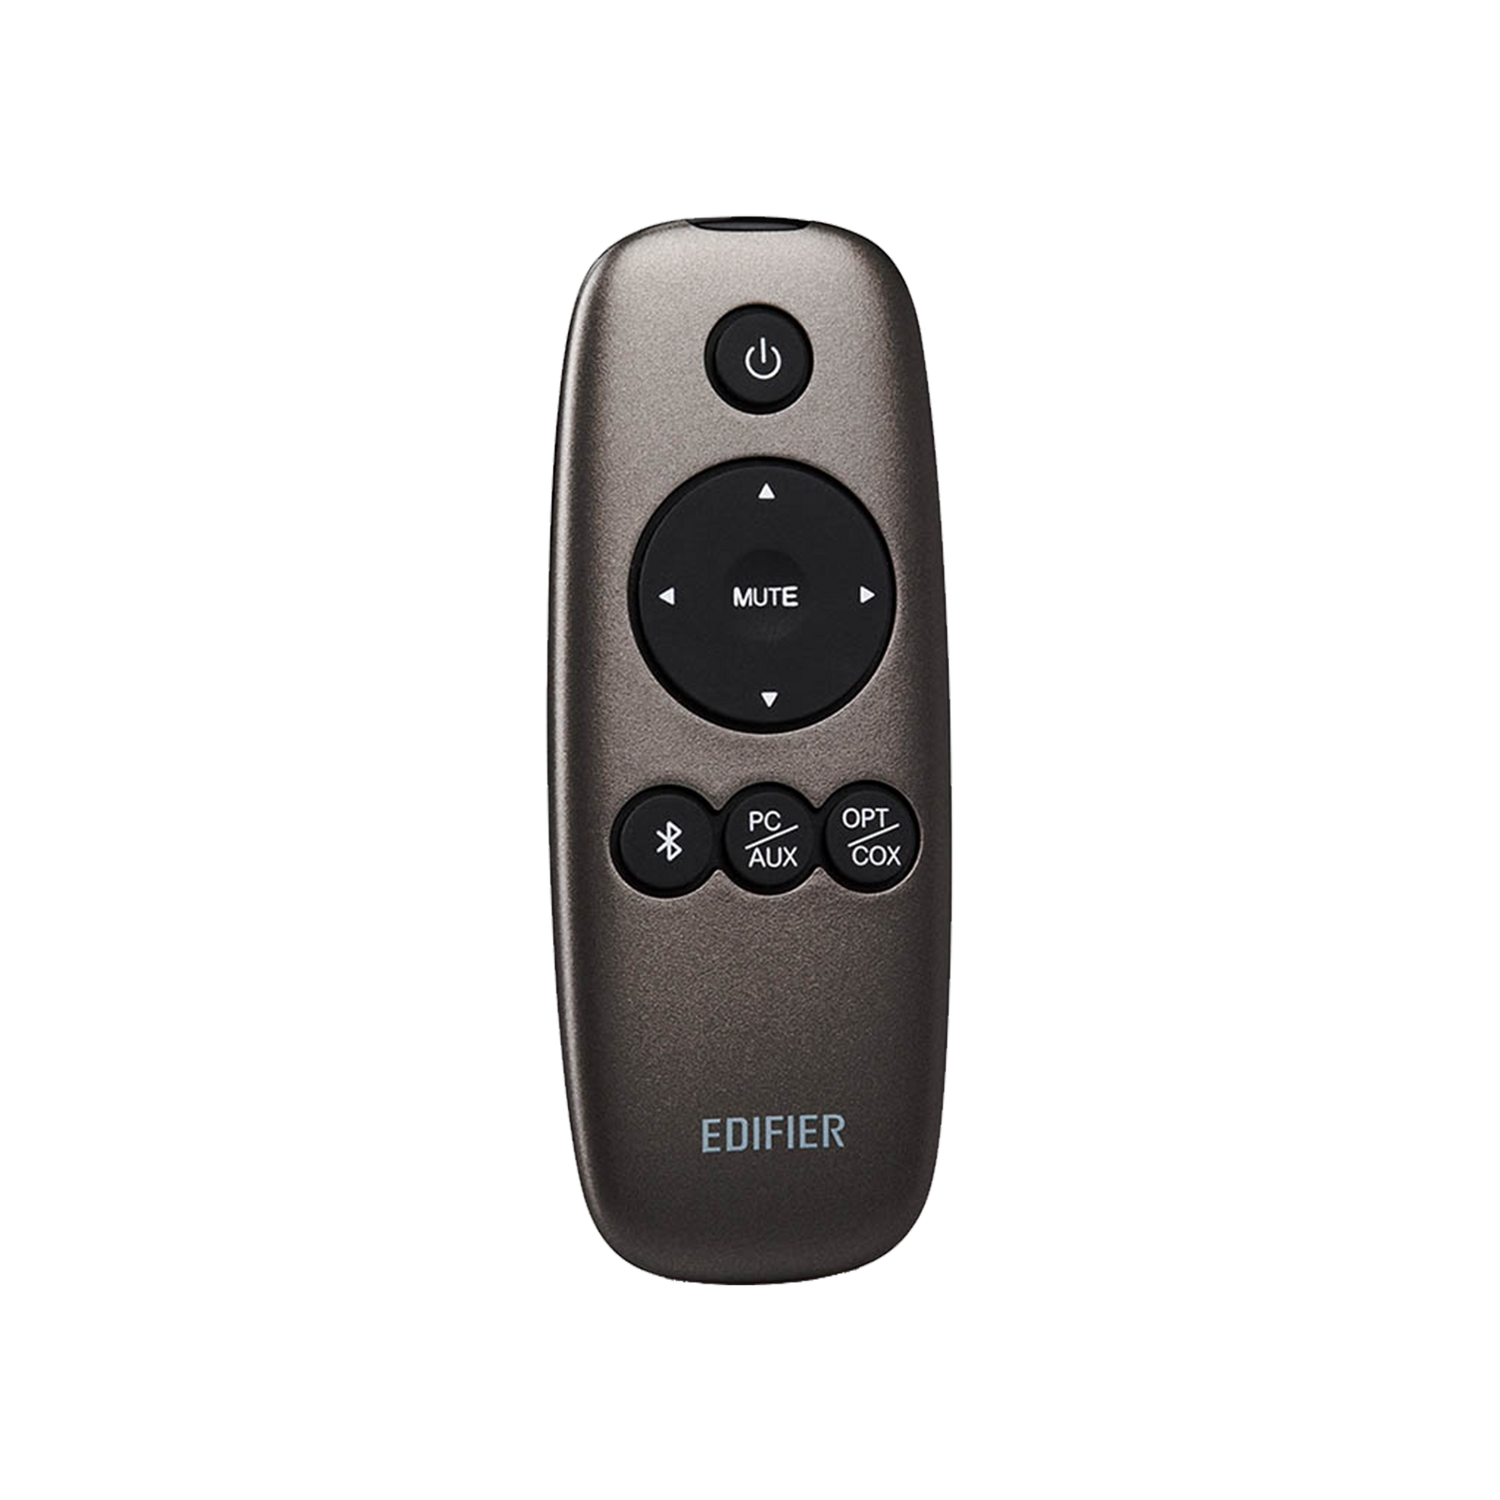 Remote - S1000DB Fully Functional Wireless Remote for The S1000DB